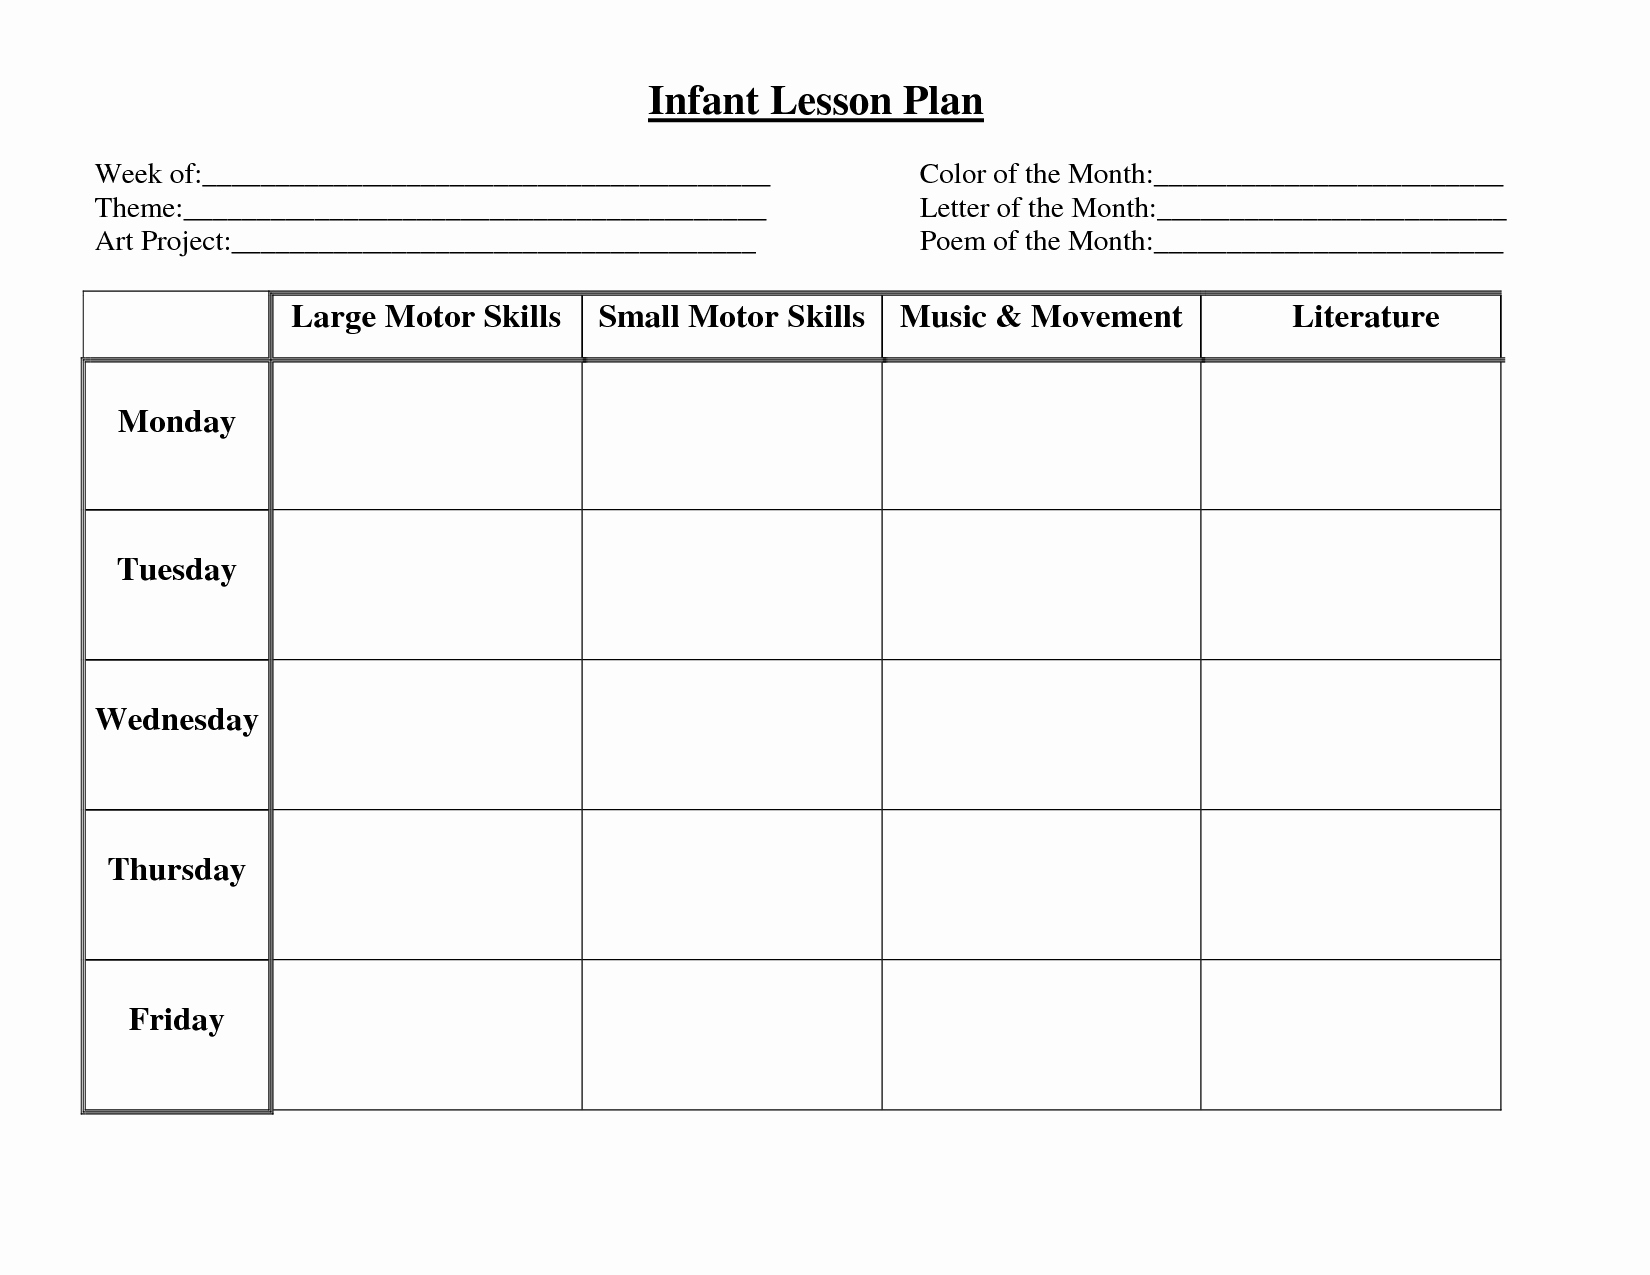 Lesson Plans Template for toddlers New Infant Blank Lesson Plan Sheets